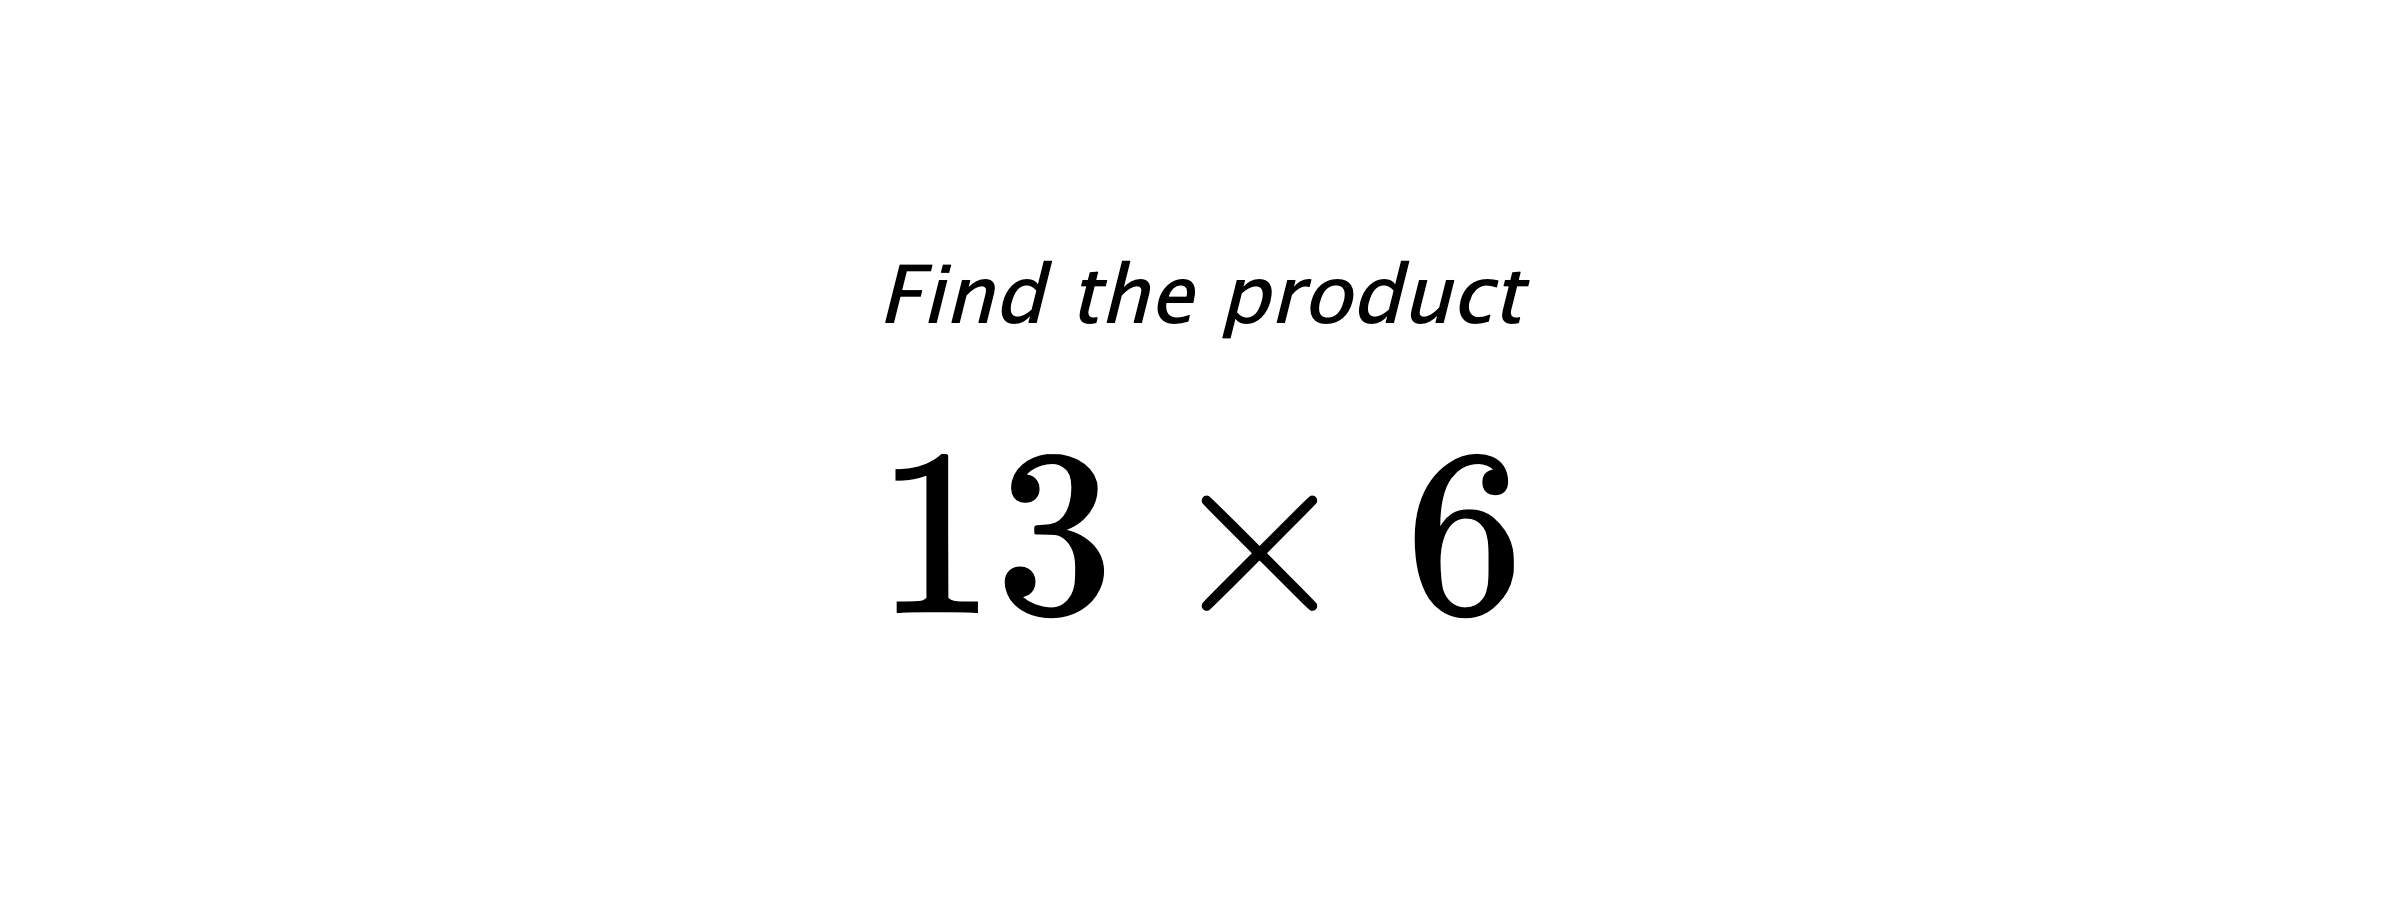 Find the product $ 13 \times 6 $